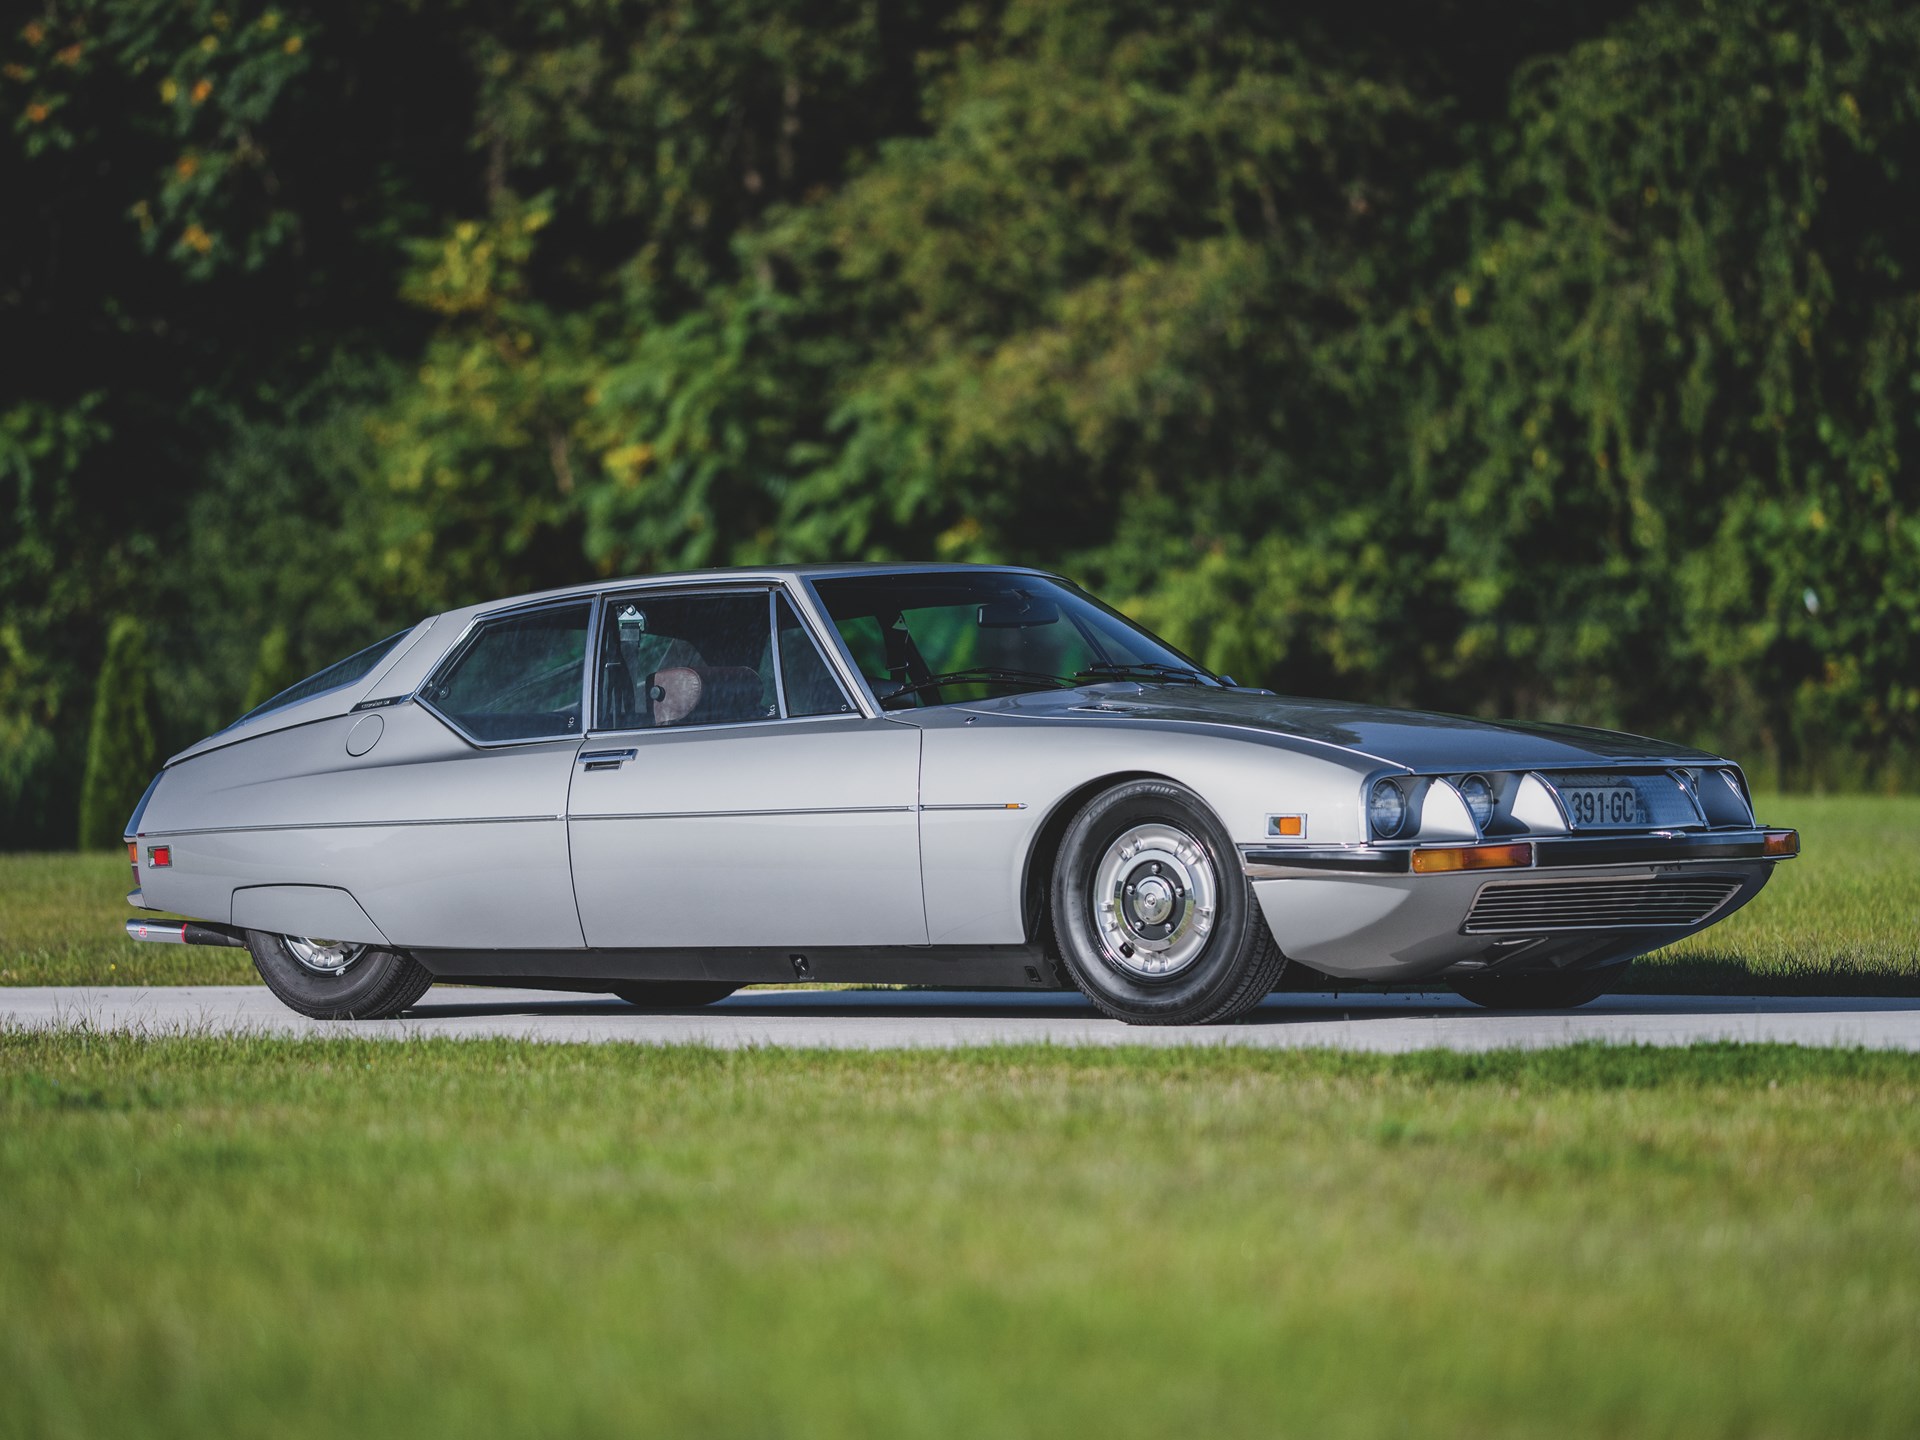 1974 Citroën SM | The Elkhart Collection | RM Sotheby's